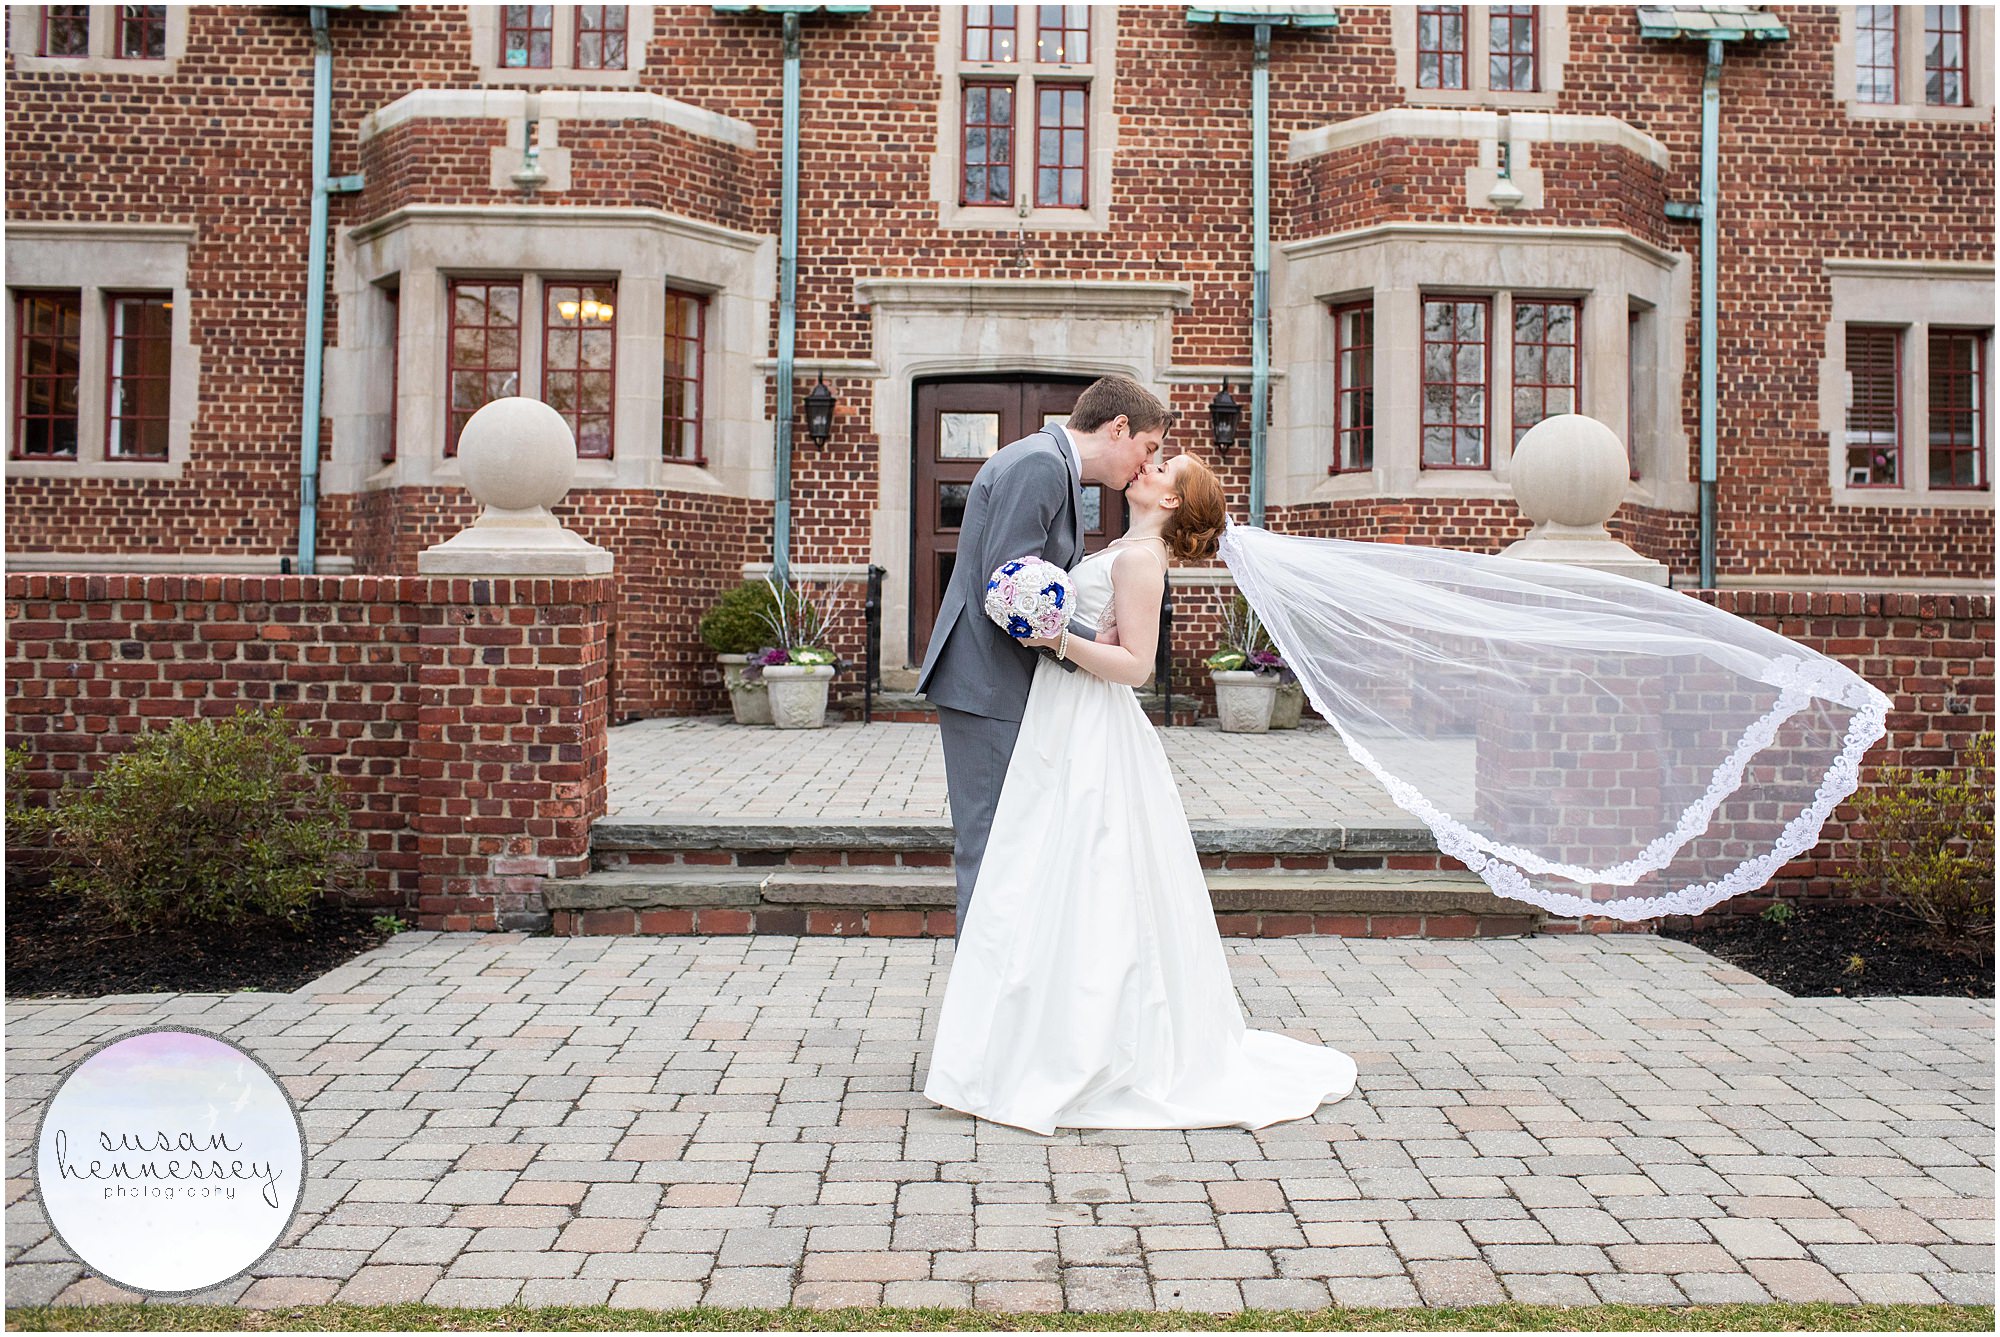 The bride's veil blows in the wind at Moorestown Community House wedding